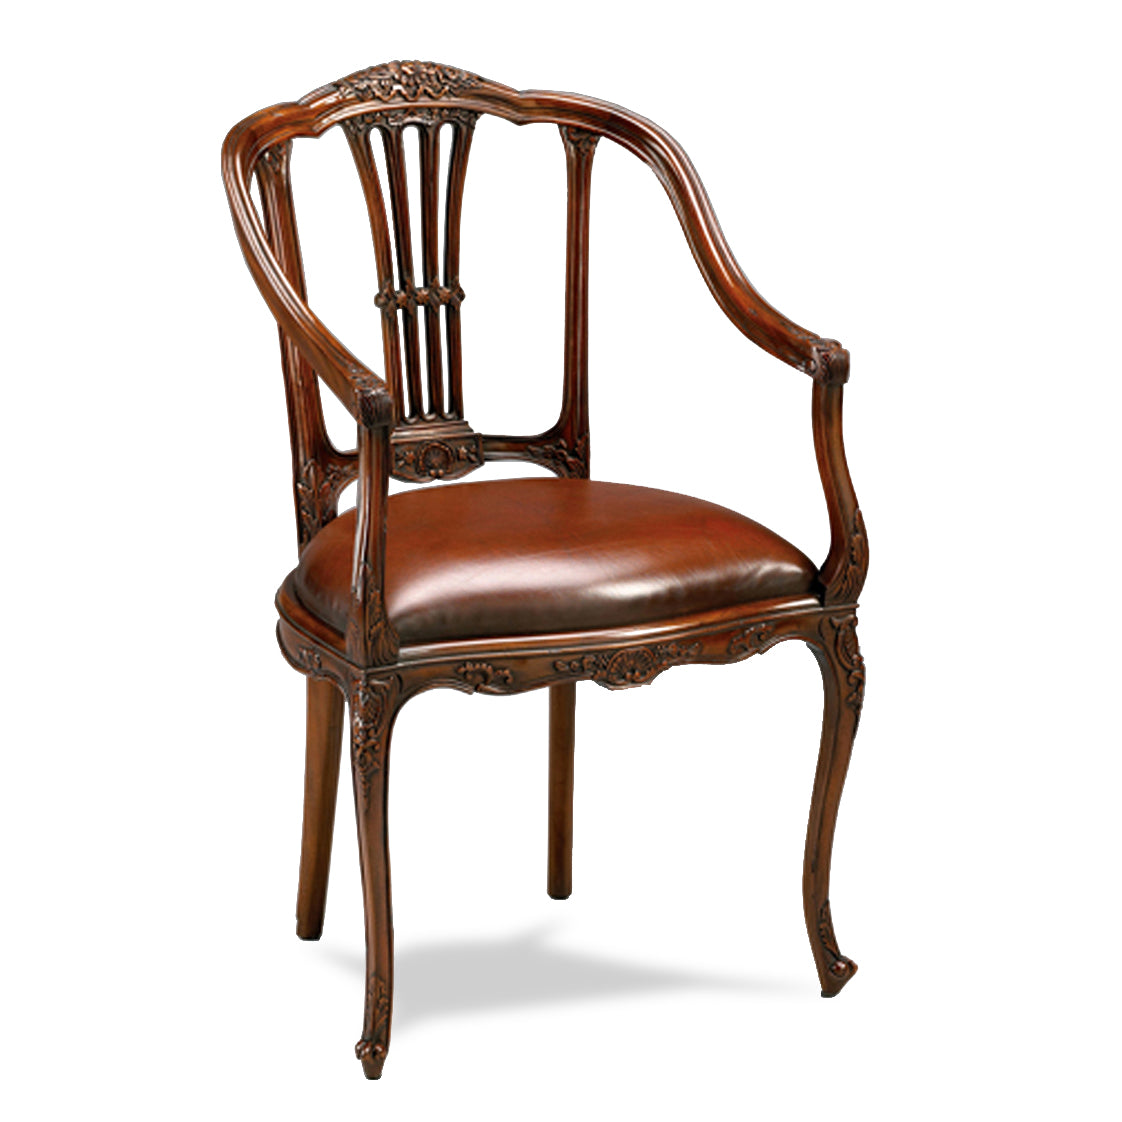 French Classical Arm Chair Furniture HK, Jansen Classical Furniture HK